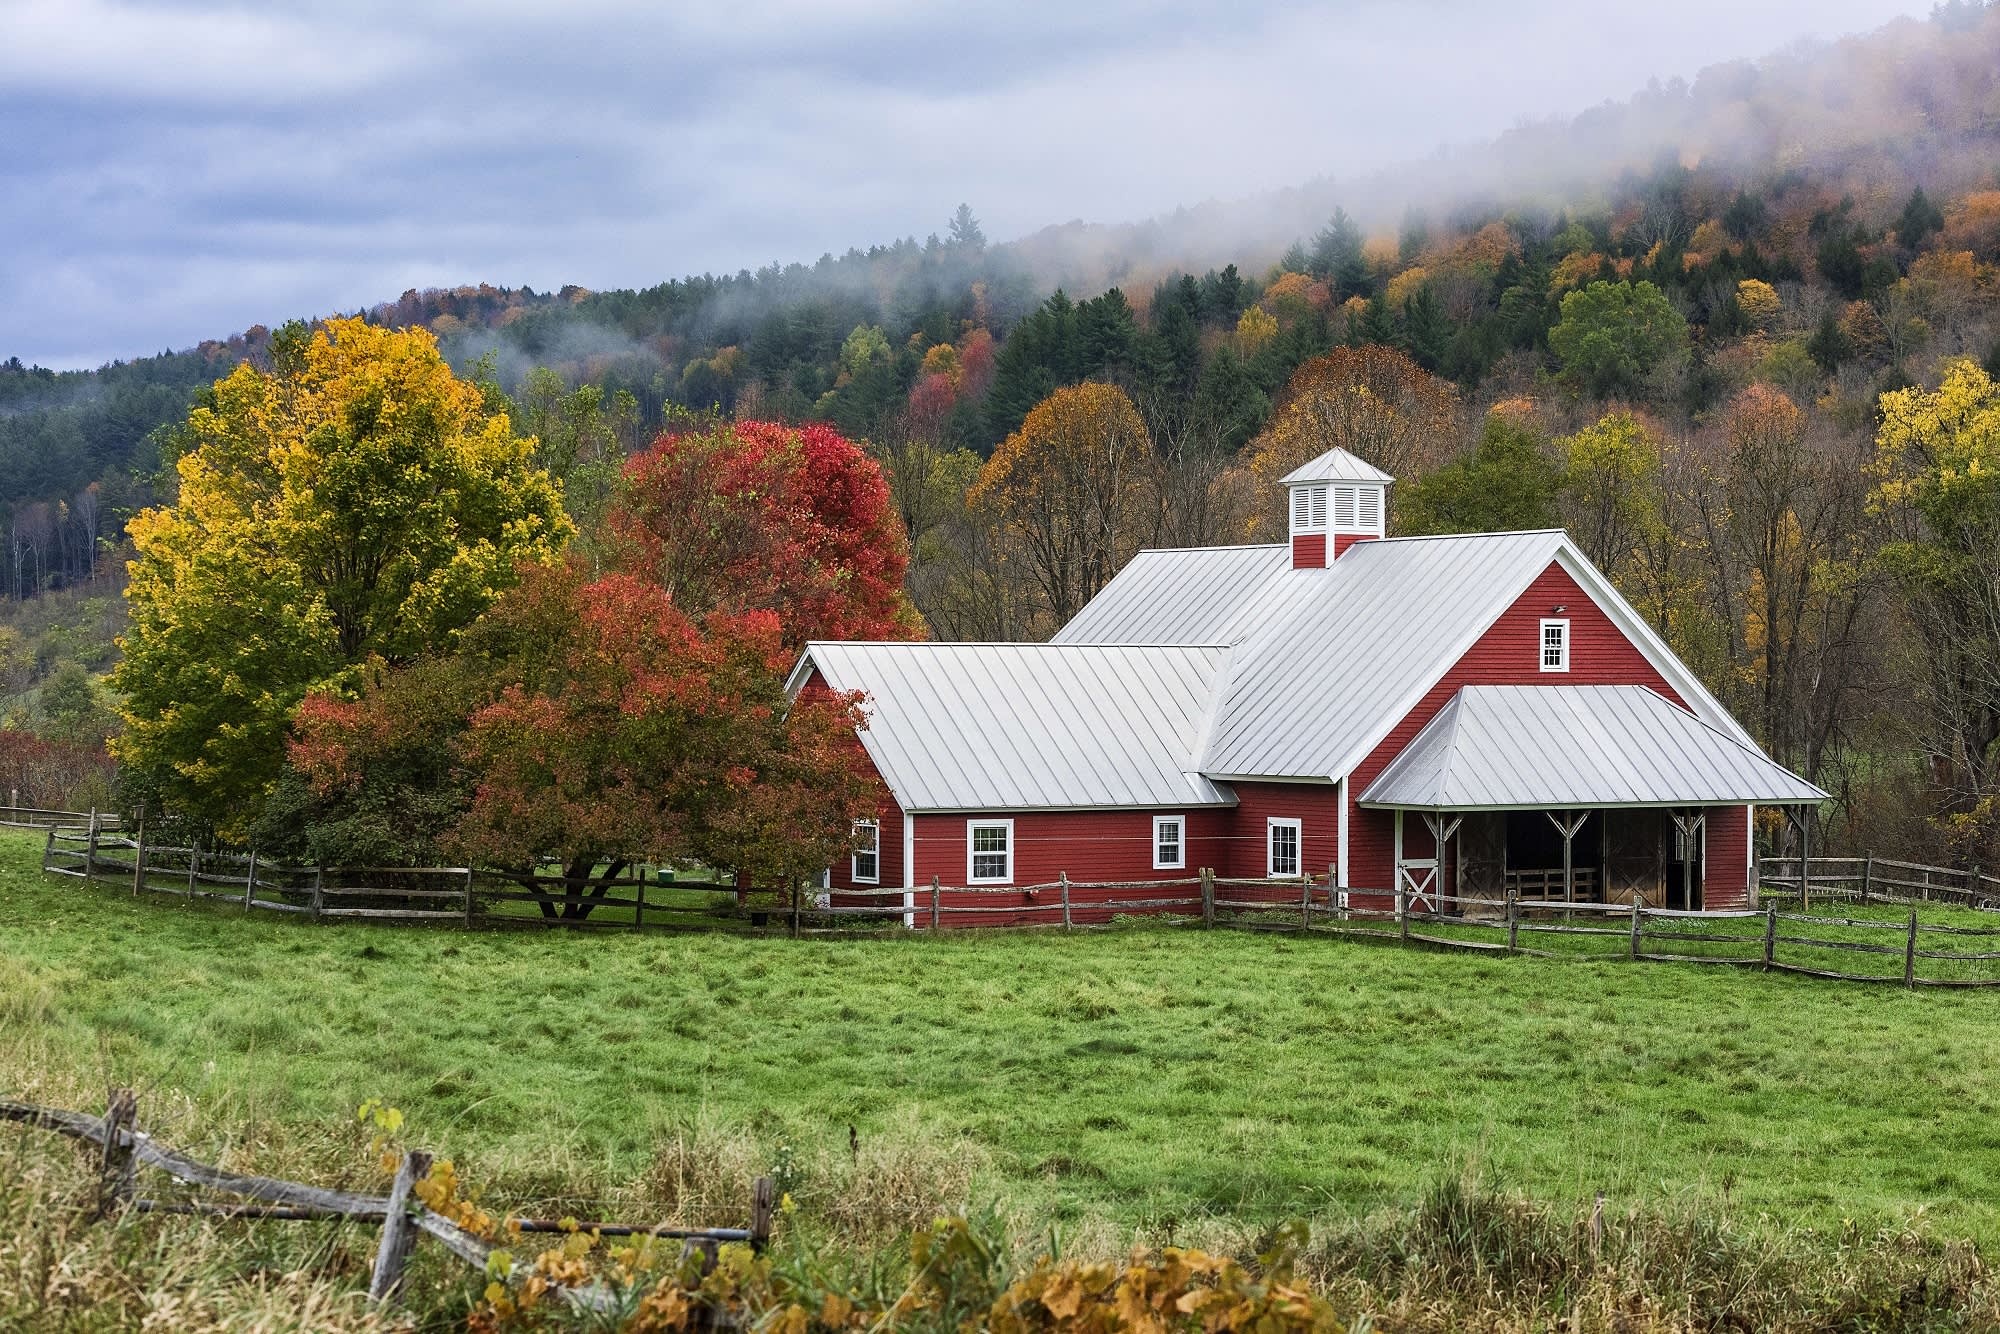 Vermont travels, Remote work opportunity, Peaceful surroundings, Relaxing lifestyle, 2000x1340 HD Desktop